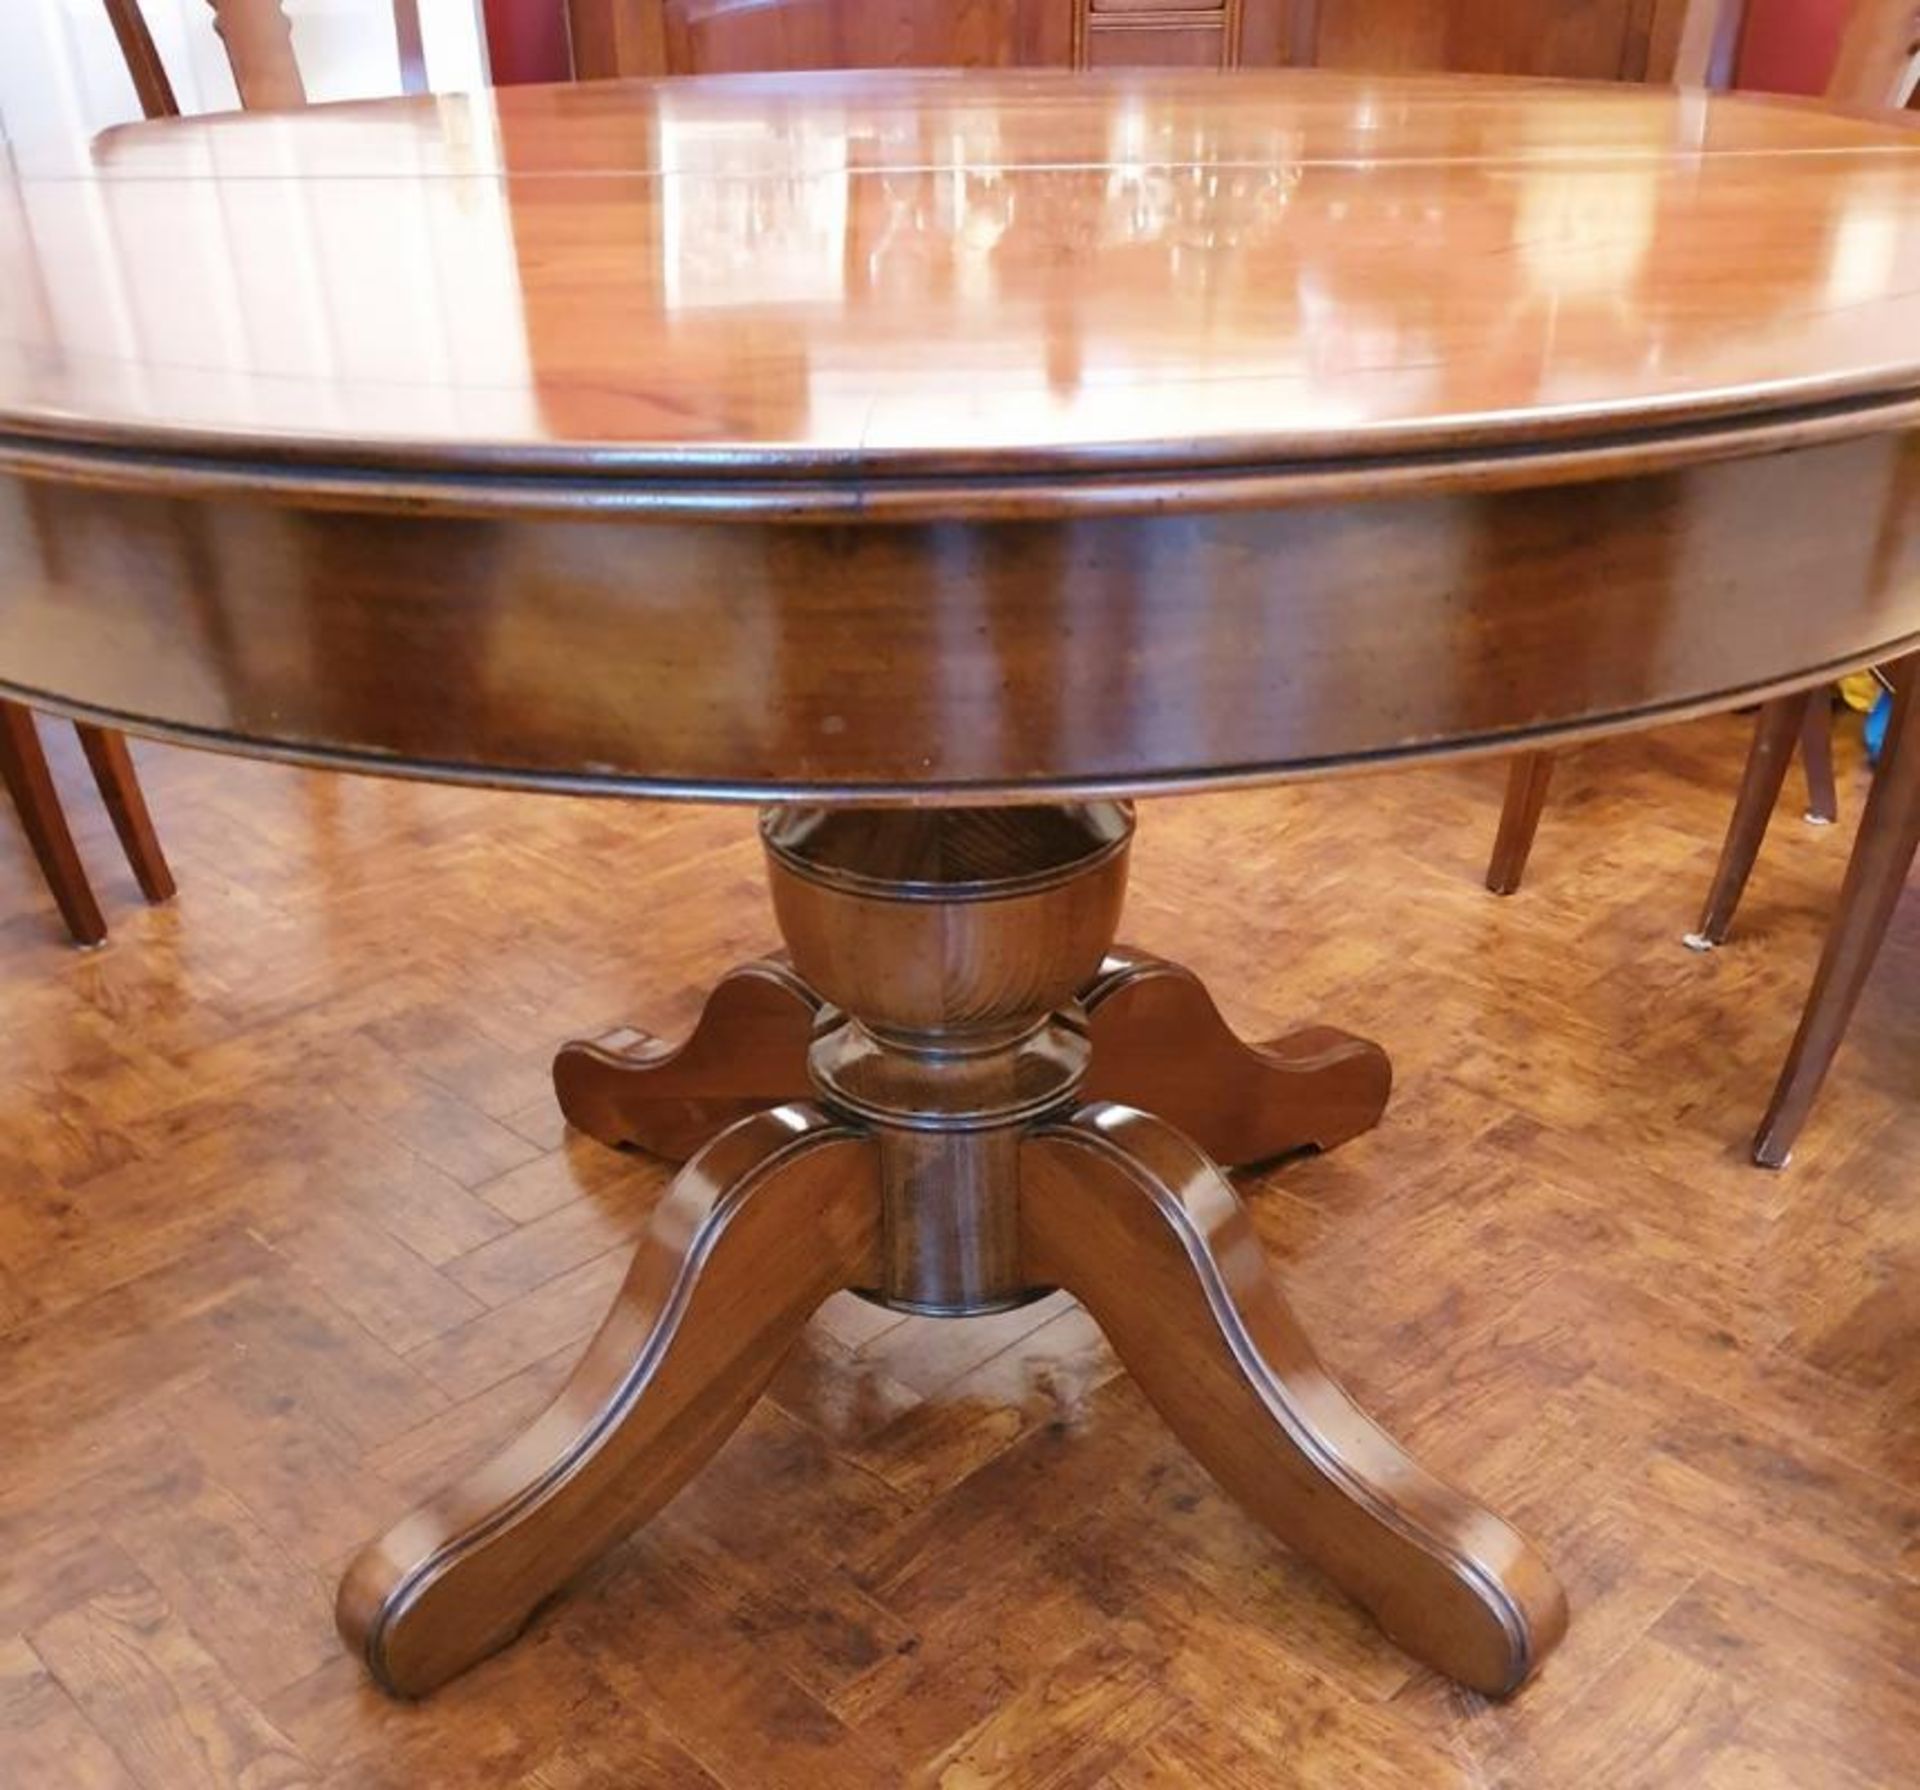 1 x GRANGE Dining Table in Solid Cherry Wood with 8 Matching Chairs - CL473 - Location: Bowdon WA14 - Image 9 of 18